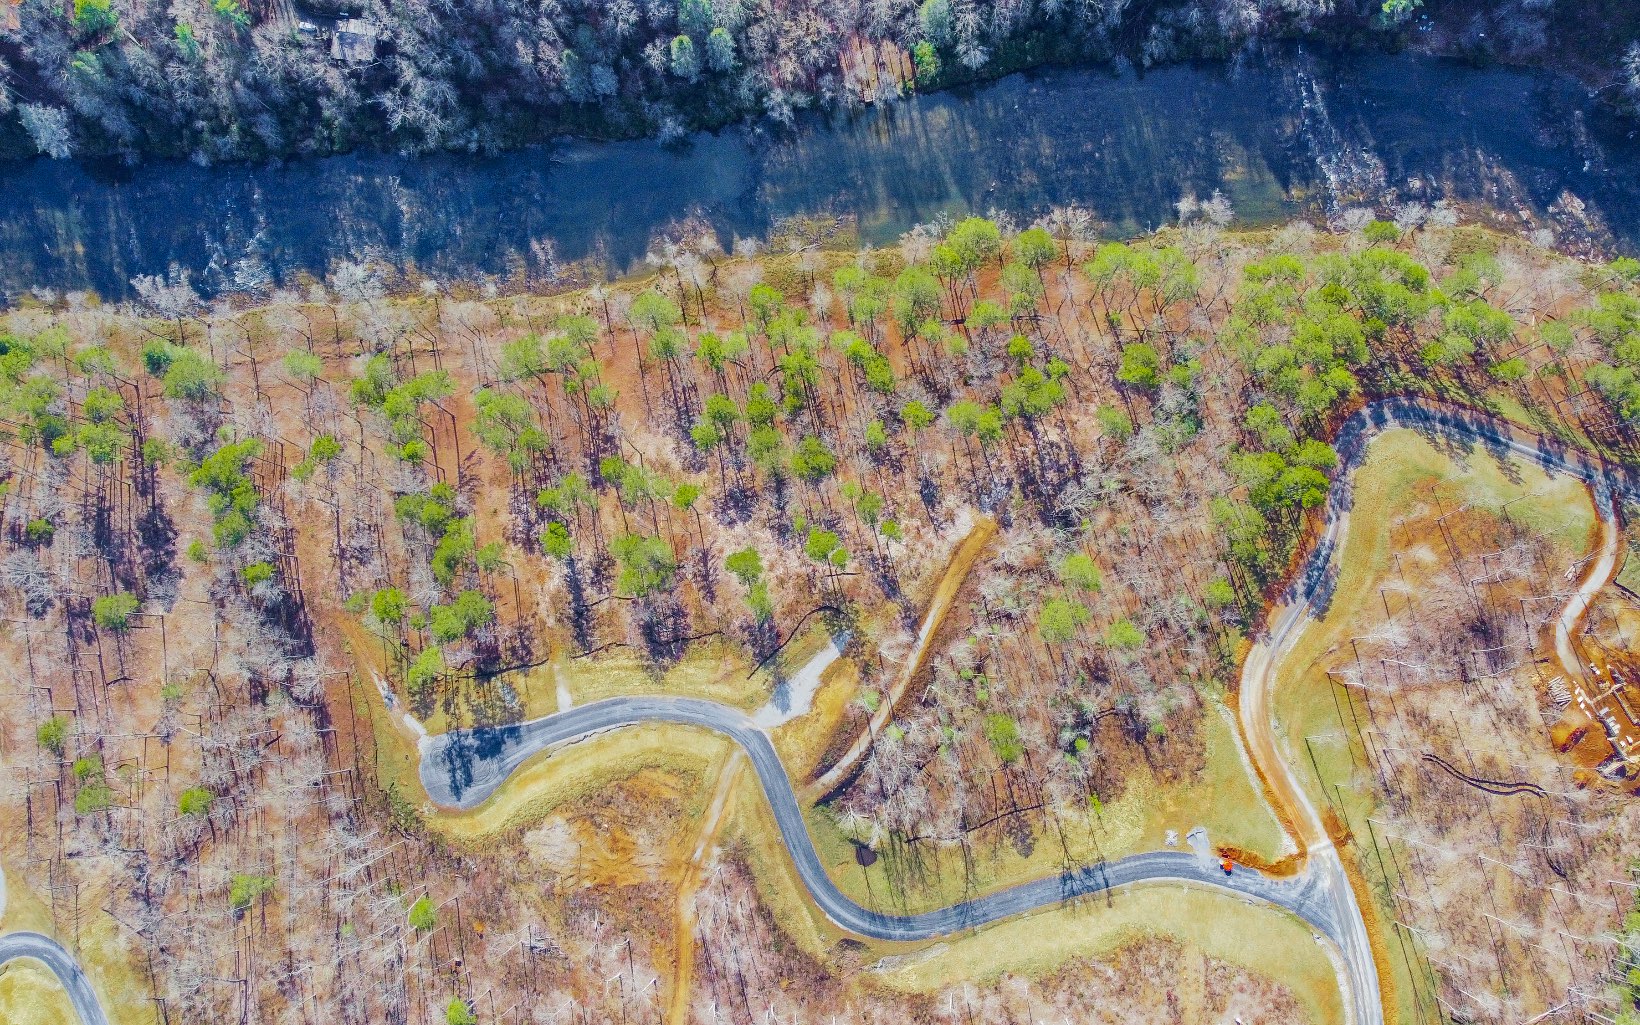 RIVER FRONT LOT - This 3.36 Acre Lot sits along the Beautiful Coosawattee River located in one of Ellijay's Newest Gated Communities, High River. Features include Homesite Cleared along with the Driveway in place so just bring your Builder or a List of Local Builders can be provided, Paved Road Frontage, Level Area At The River and Breath Taking View of the Coosawattee River.